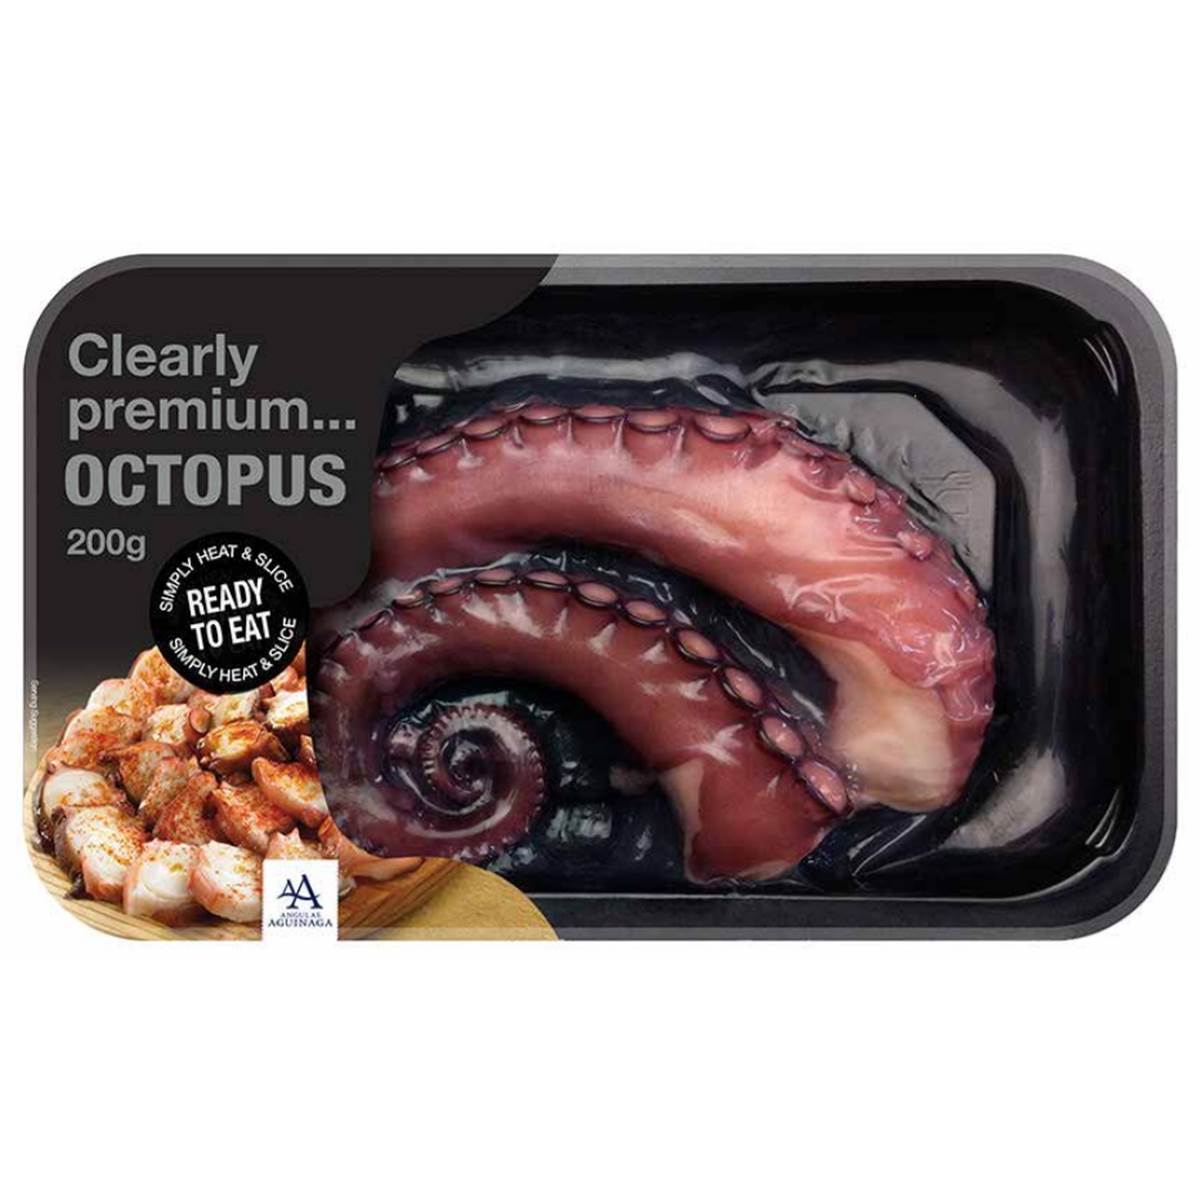 Calories in Clearly Premium Octopus